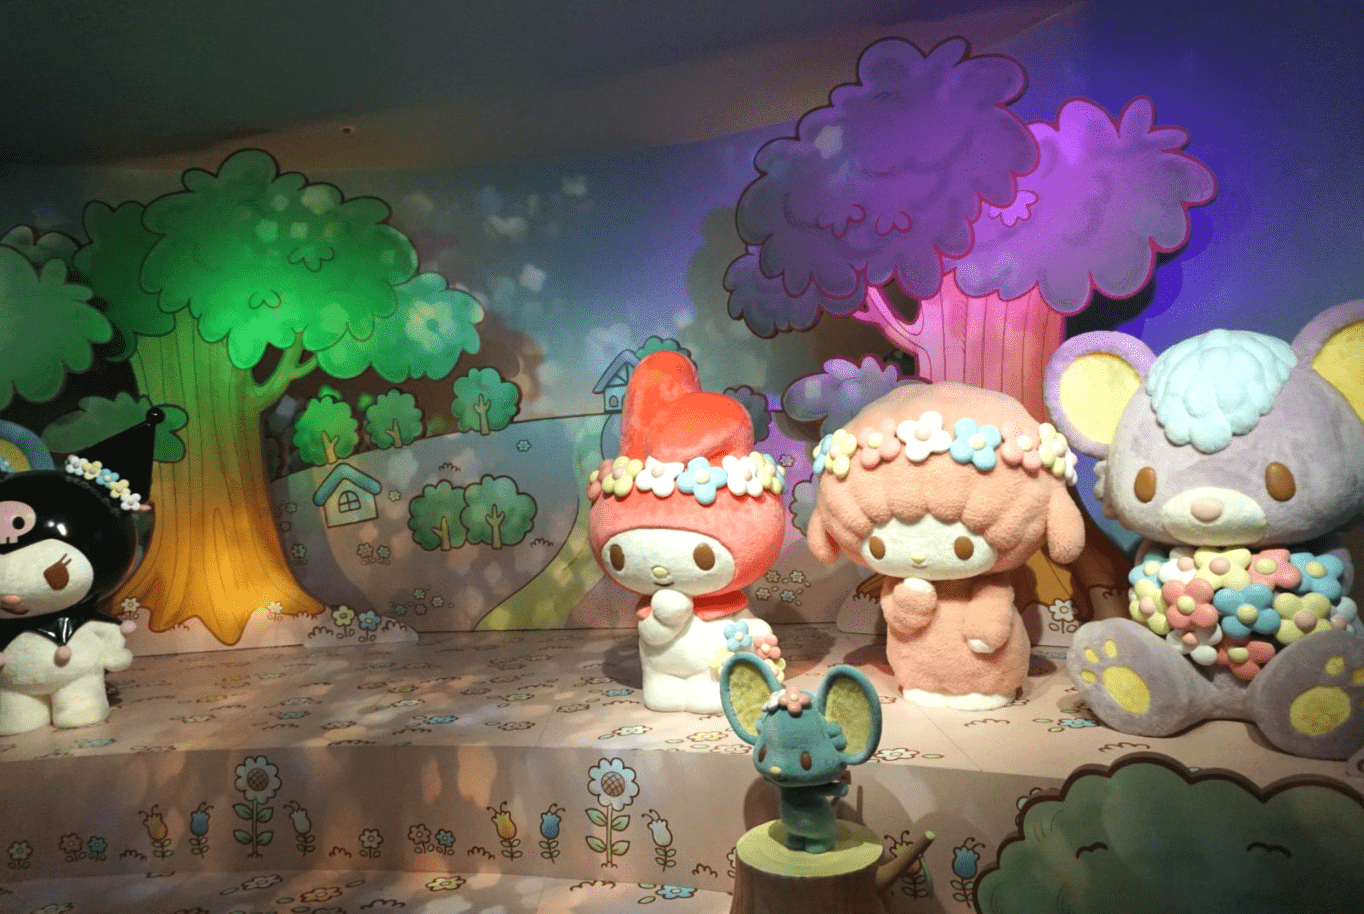 The First Ever Show by Rock!! Real Escape Game Is Coming to Sanrio  Puroland!, Press Release News